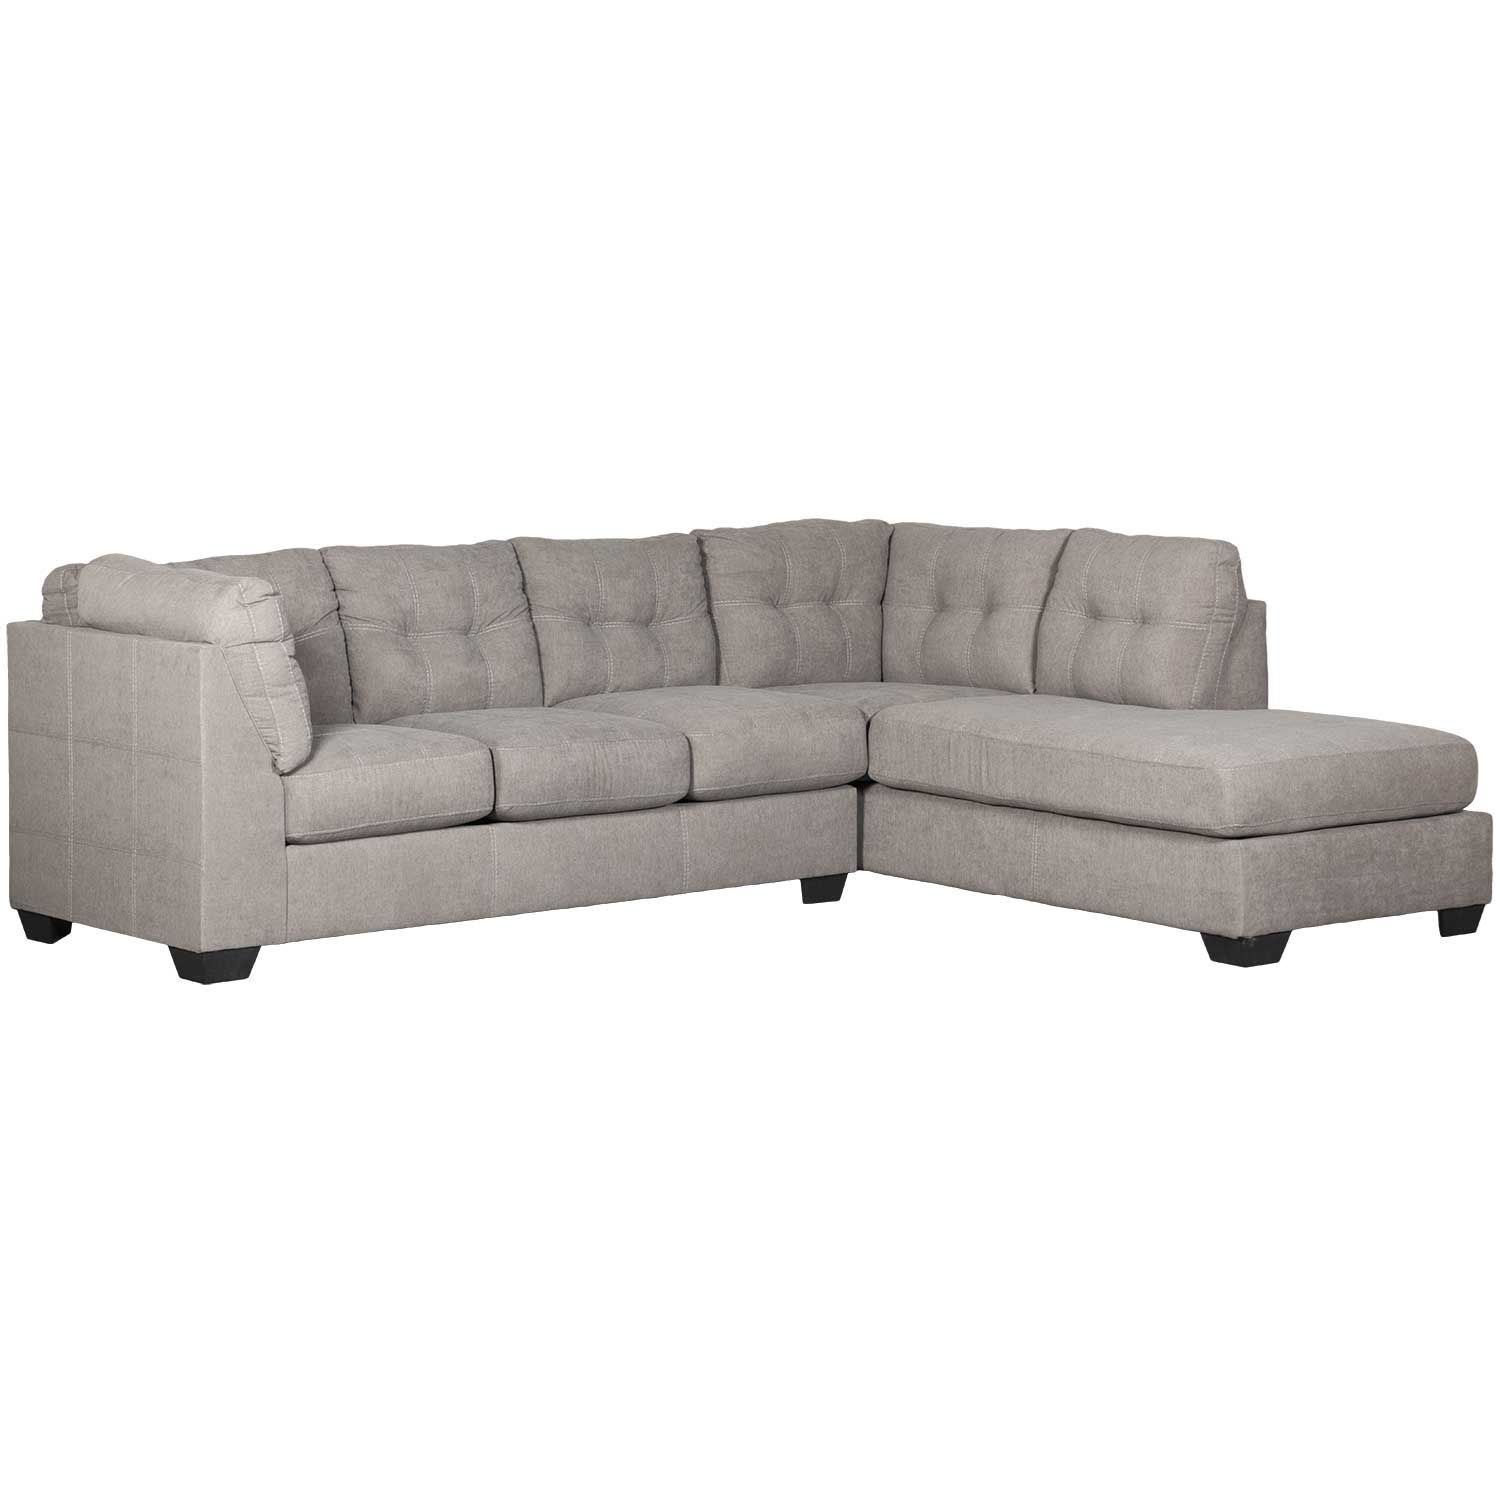 Maier Charcoal 2 Piece Sectional With Raf Chaise Inside 2pc Burland Contemporary Sectional Sofas Charcoal (View 11 of 15)